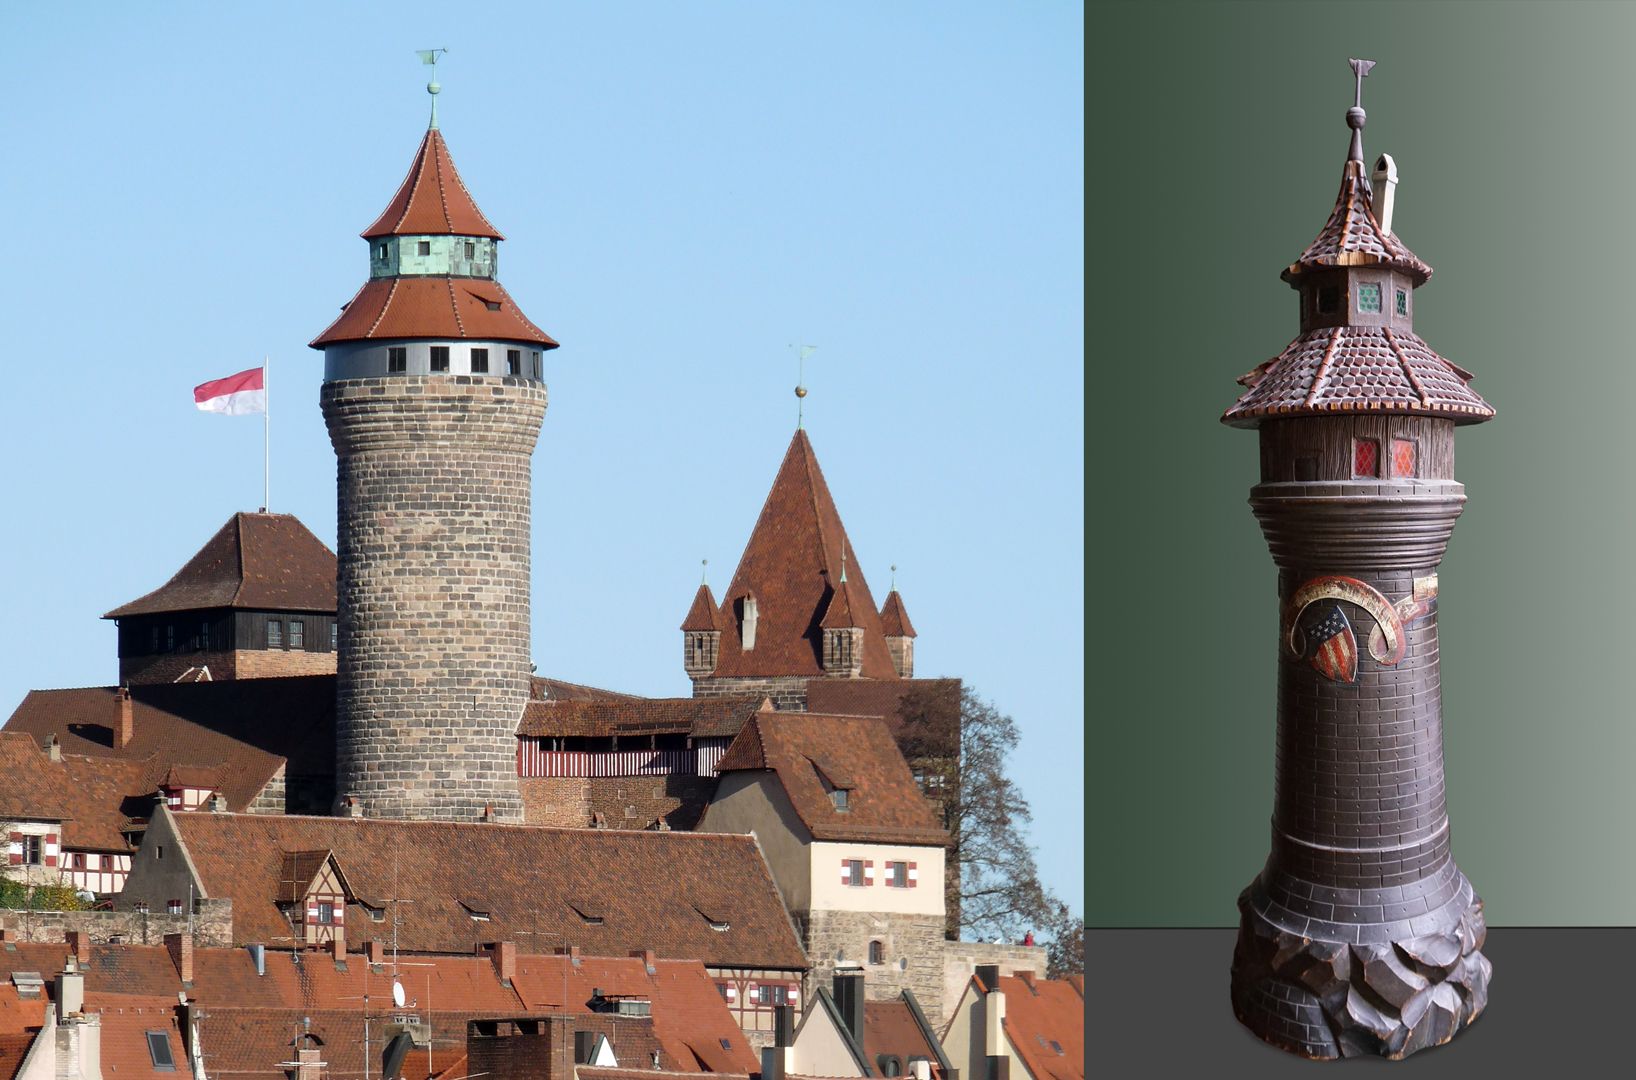 Money box Image comparison with the Sinwell Tower of Nuremberg Castle ​